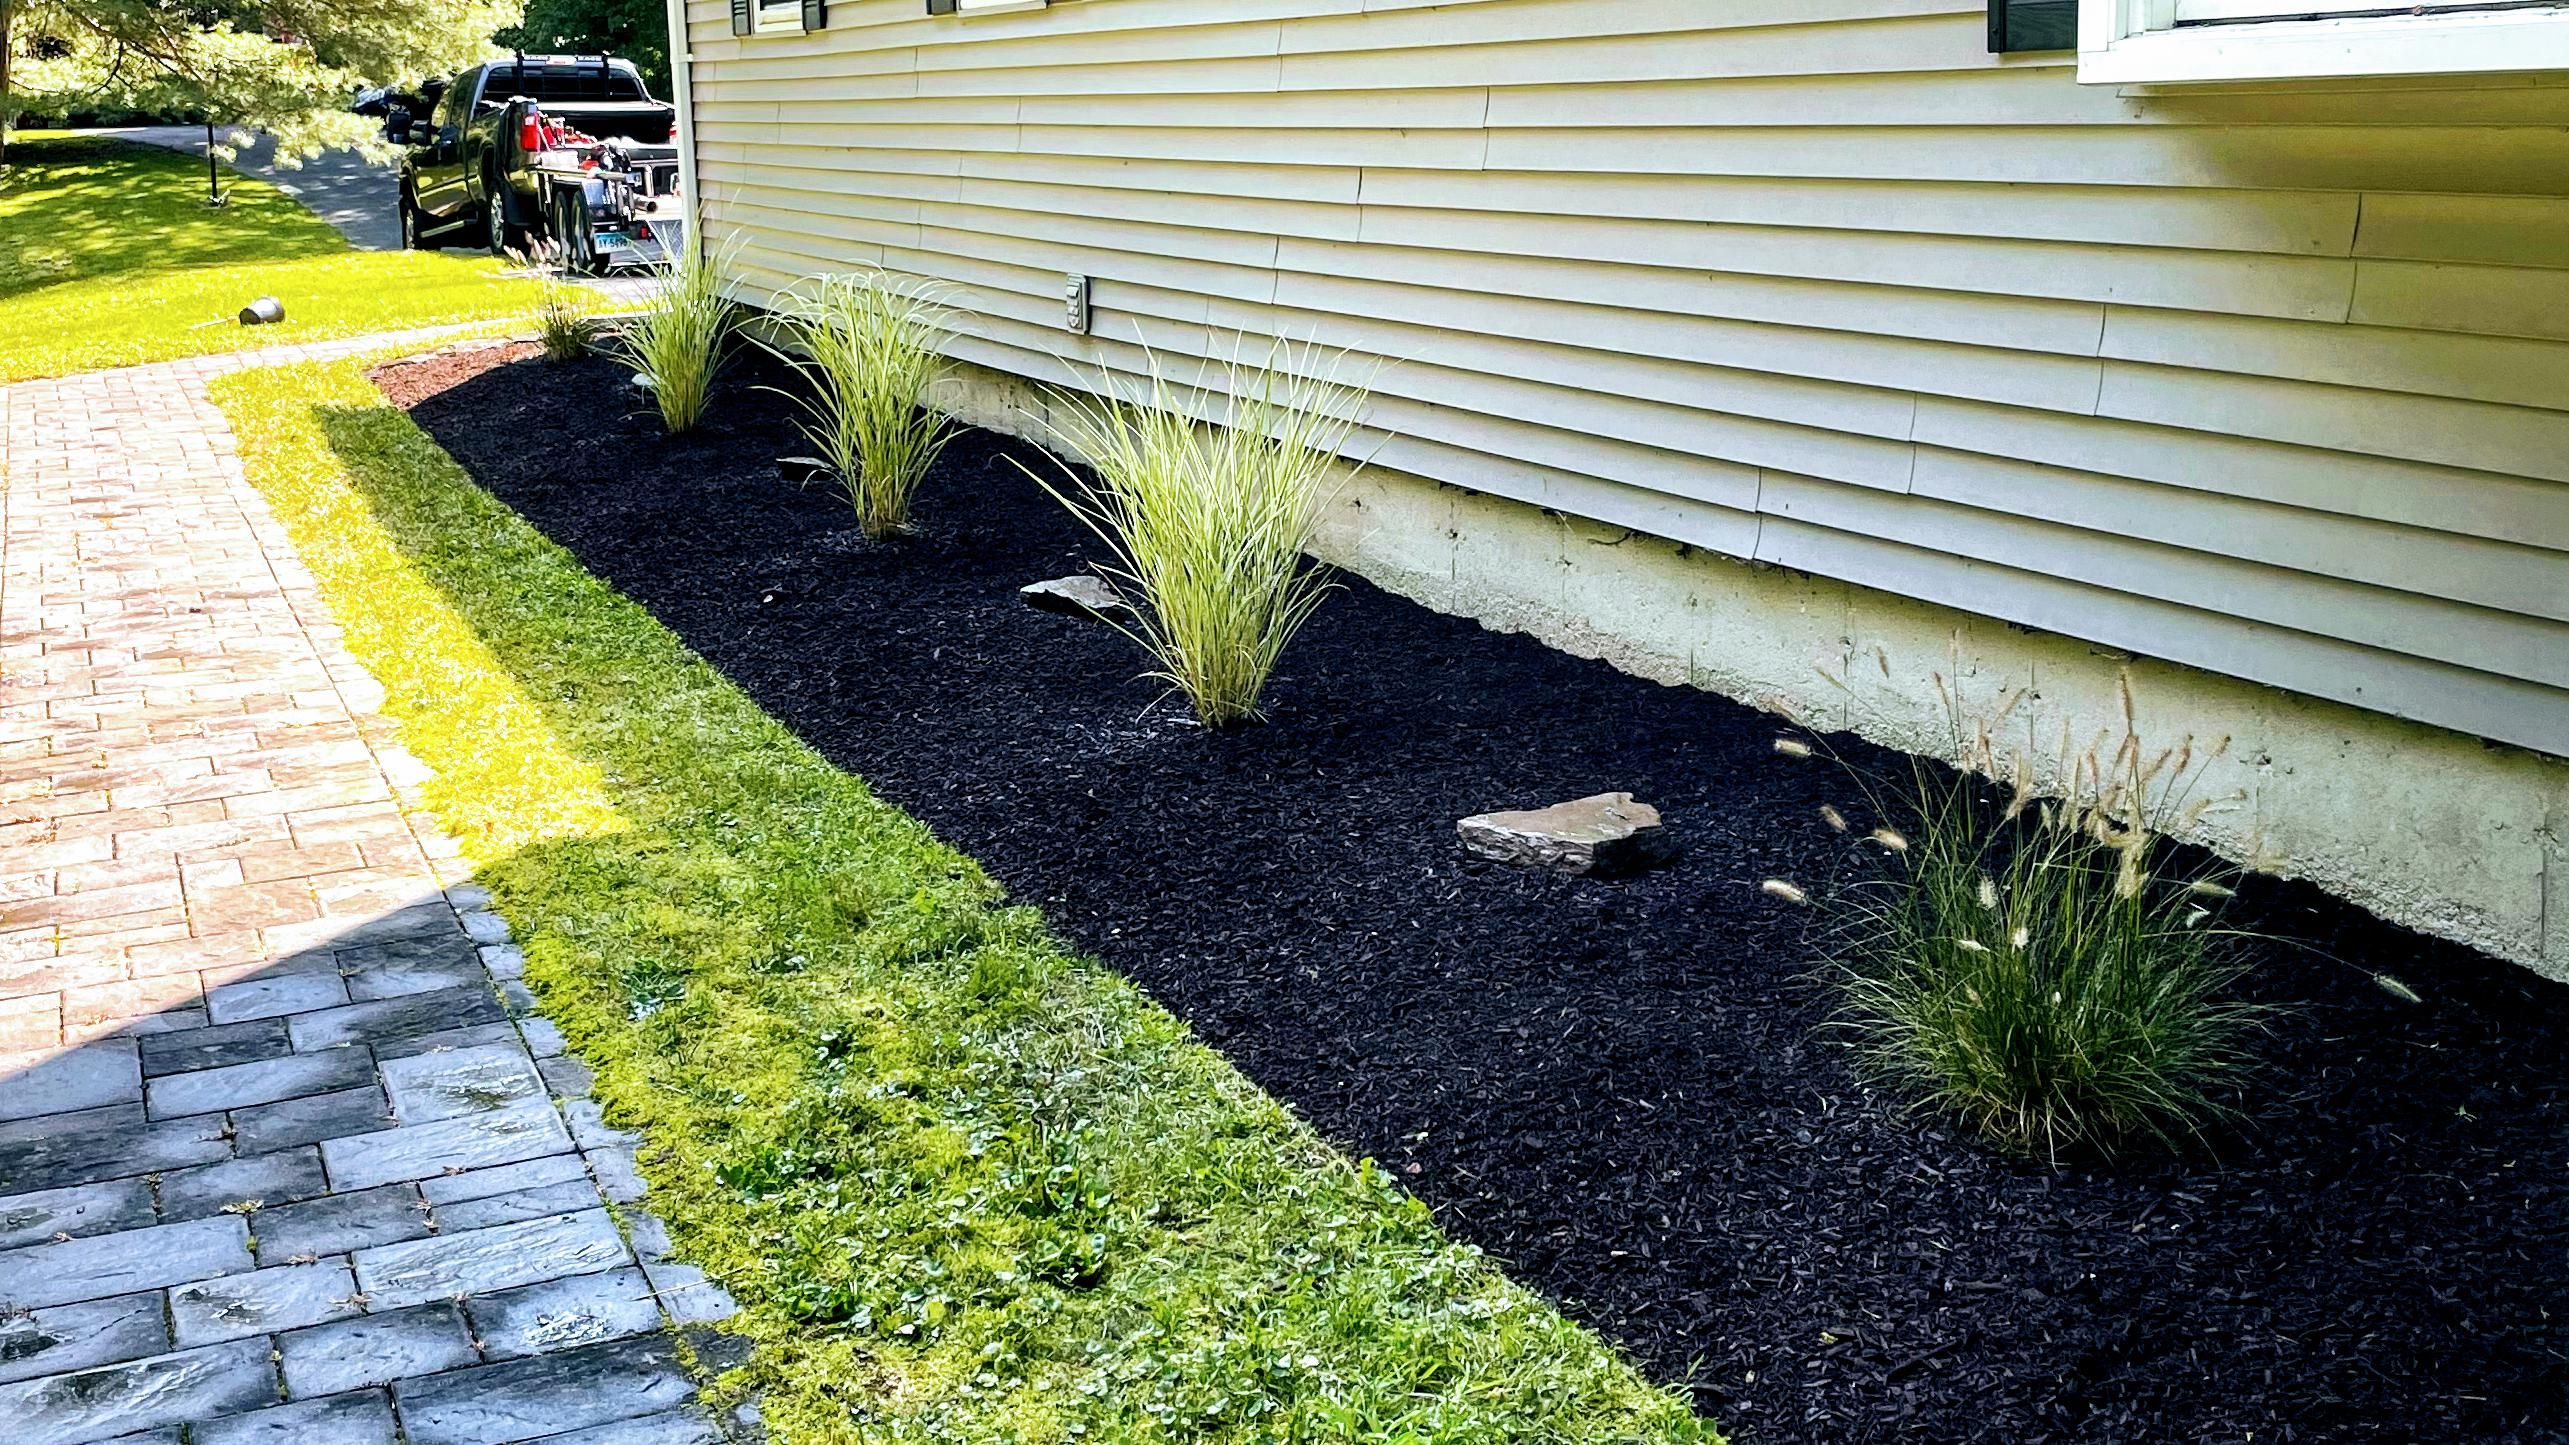 Lawn Care for CS Property Maintenance in Middlebury, CT